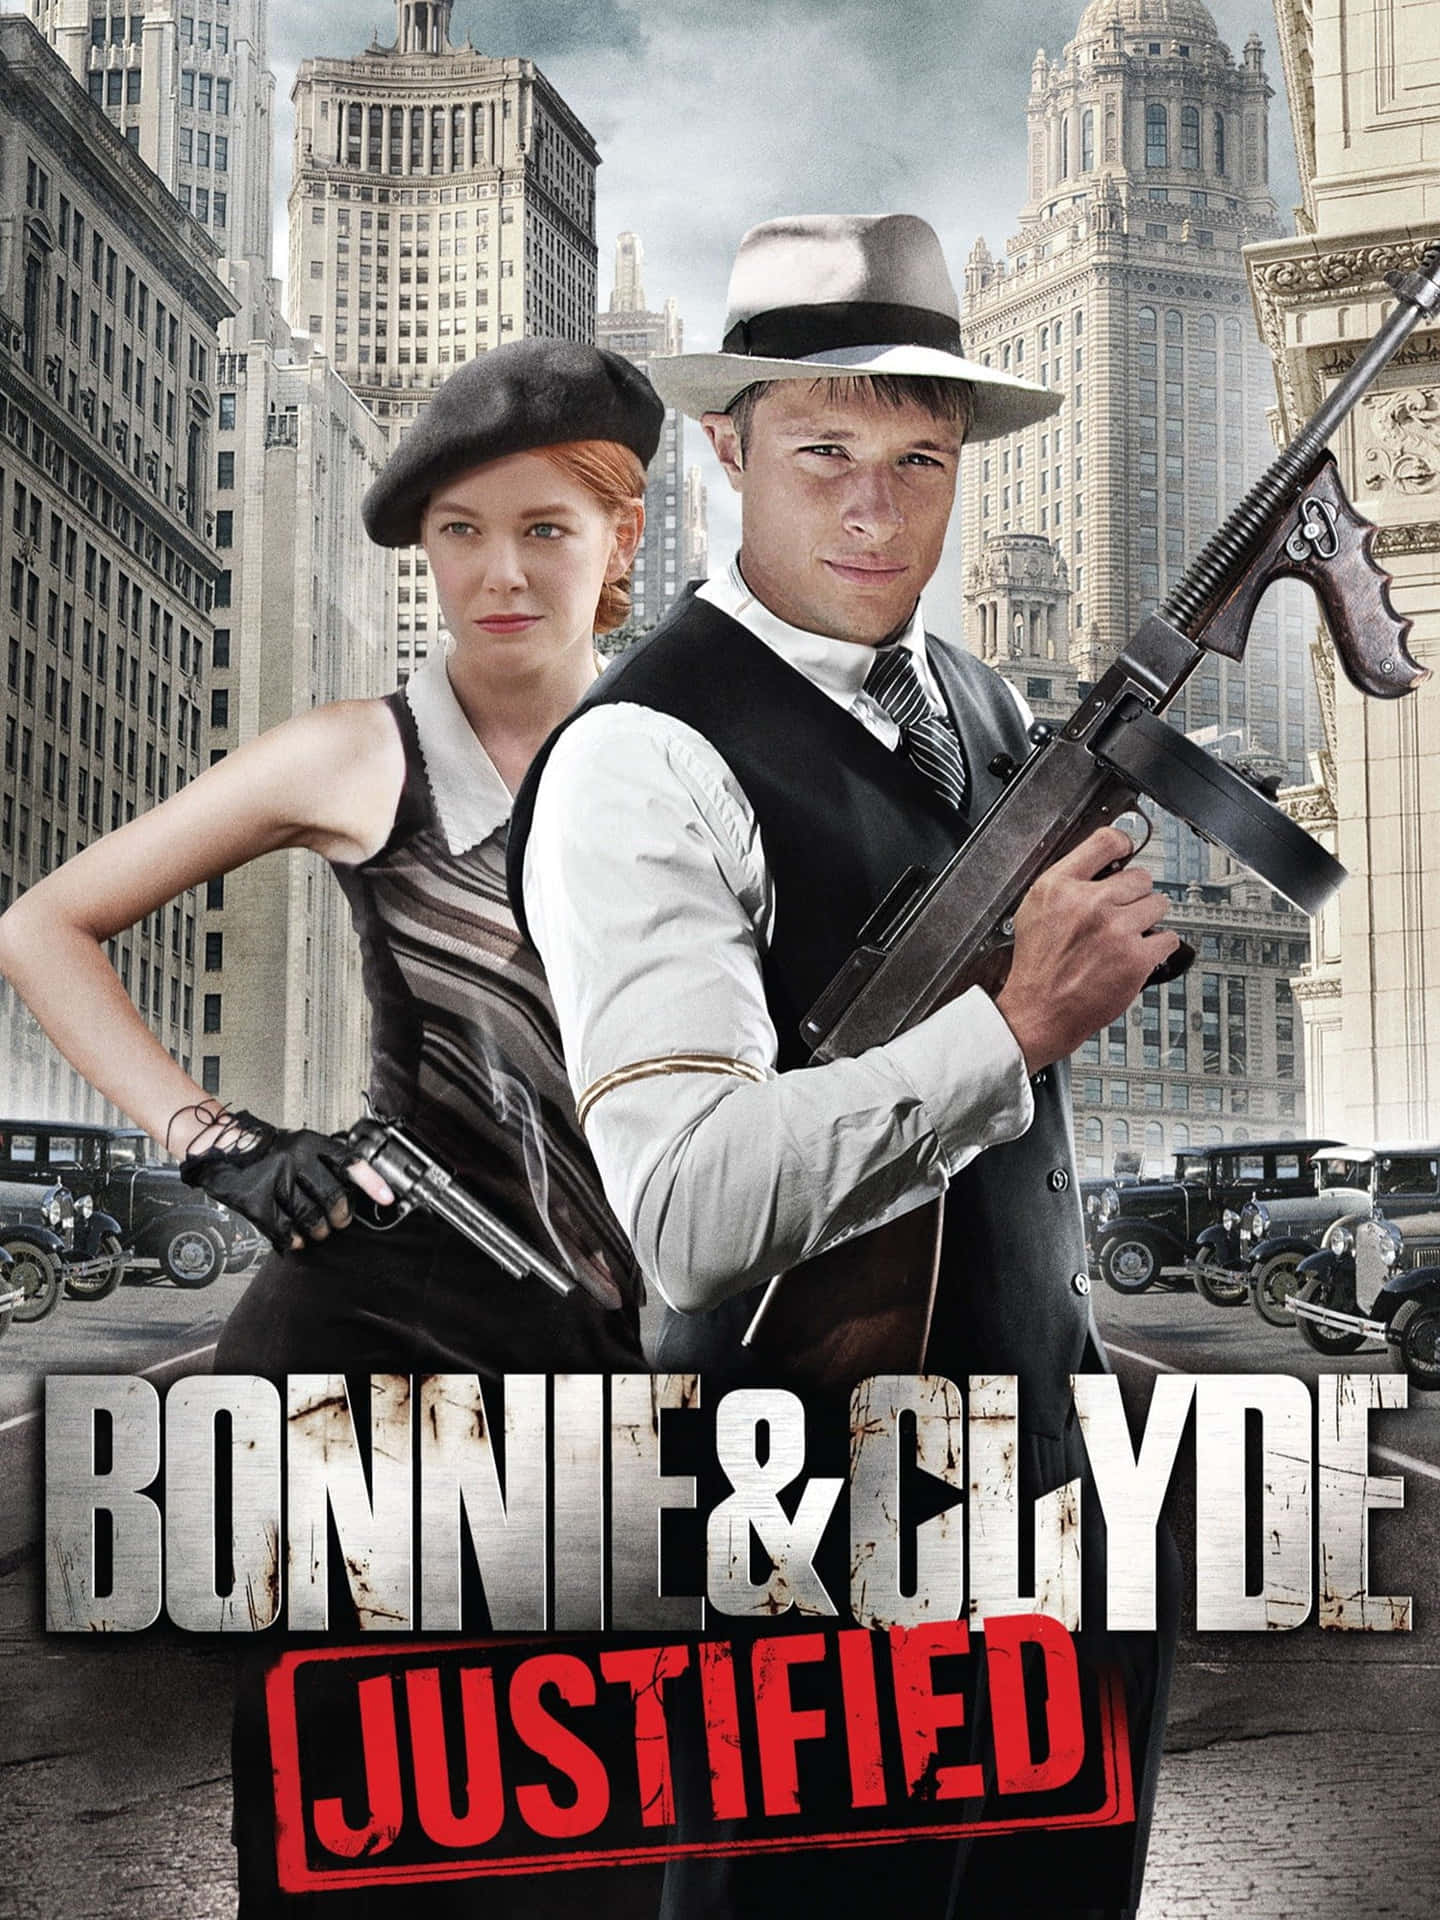 criminal duo Bonnie and Clyde